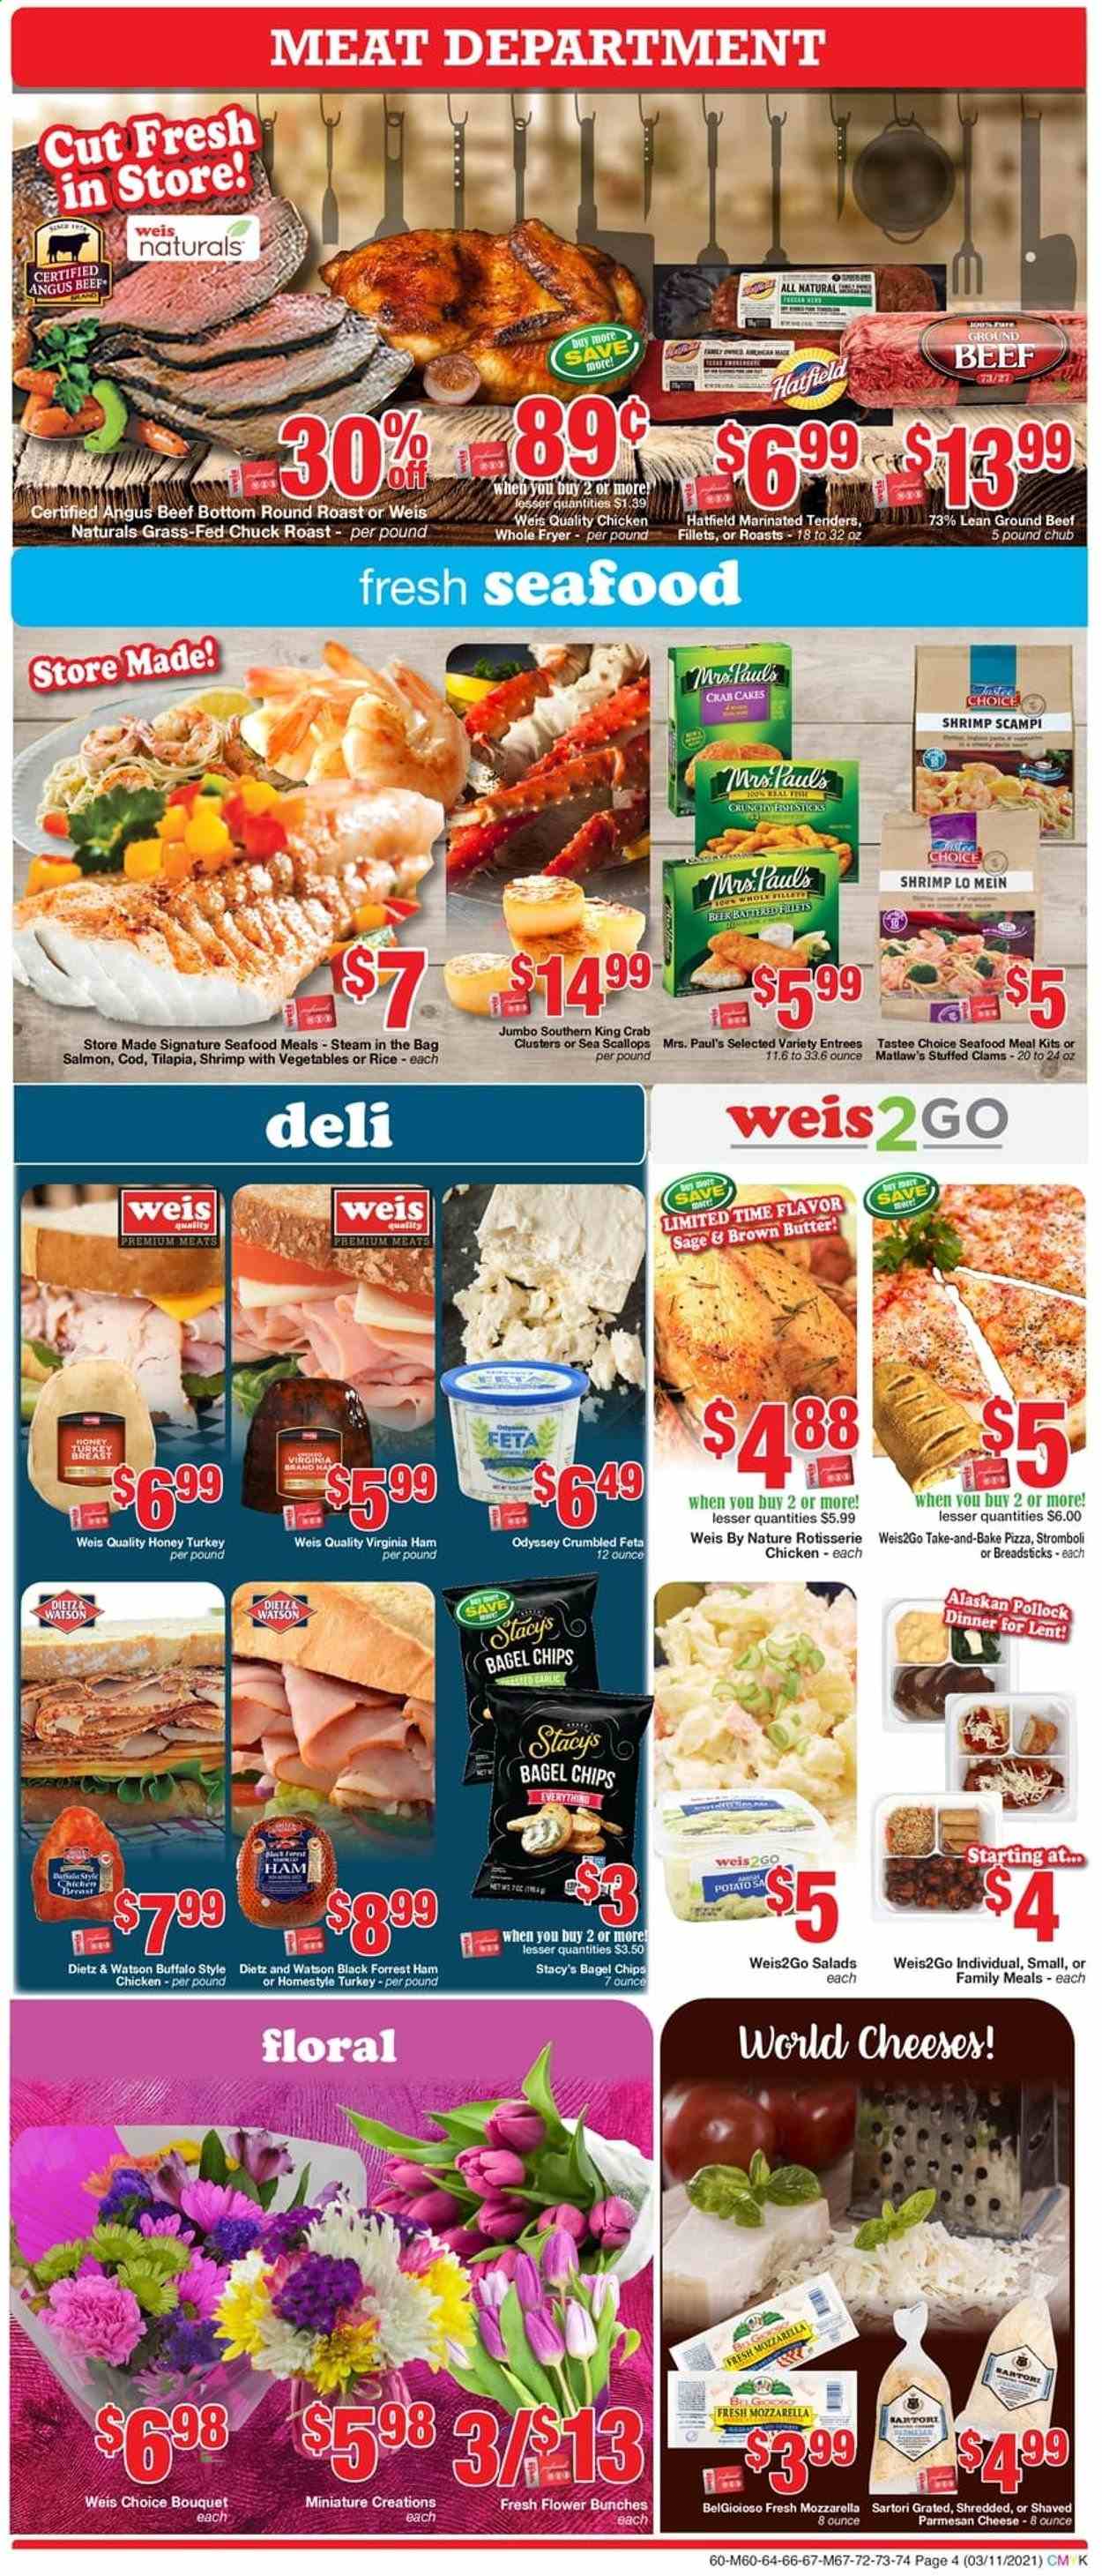 thumbnail - Weis Flyer - 03/11/2021 - 04/08/2021 - Sales products - bread sticks, bagels, chicken breasts, beef meat, ground beef, round roast, chuck roast, clams, cod, salmon, scallops, tilapia, king crab, pollock, seafood, shrimps, crab cake, pizza, ham, virginia ham, Dietz & Watson, mozzarella, parmesan, cheese, feta, butter, chips, rice, honey, bunches, bouquet. Page 4.